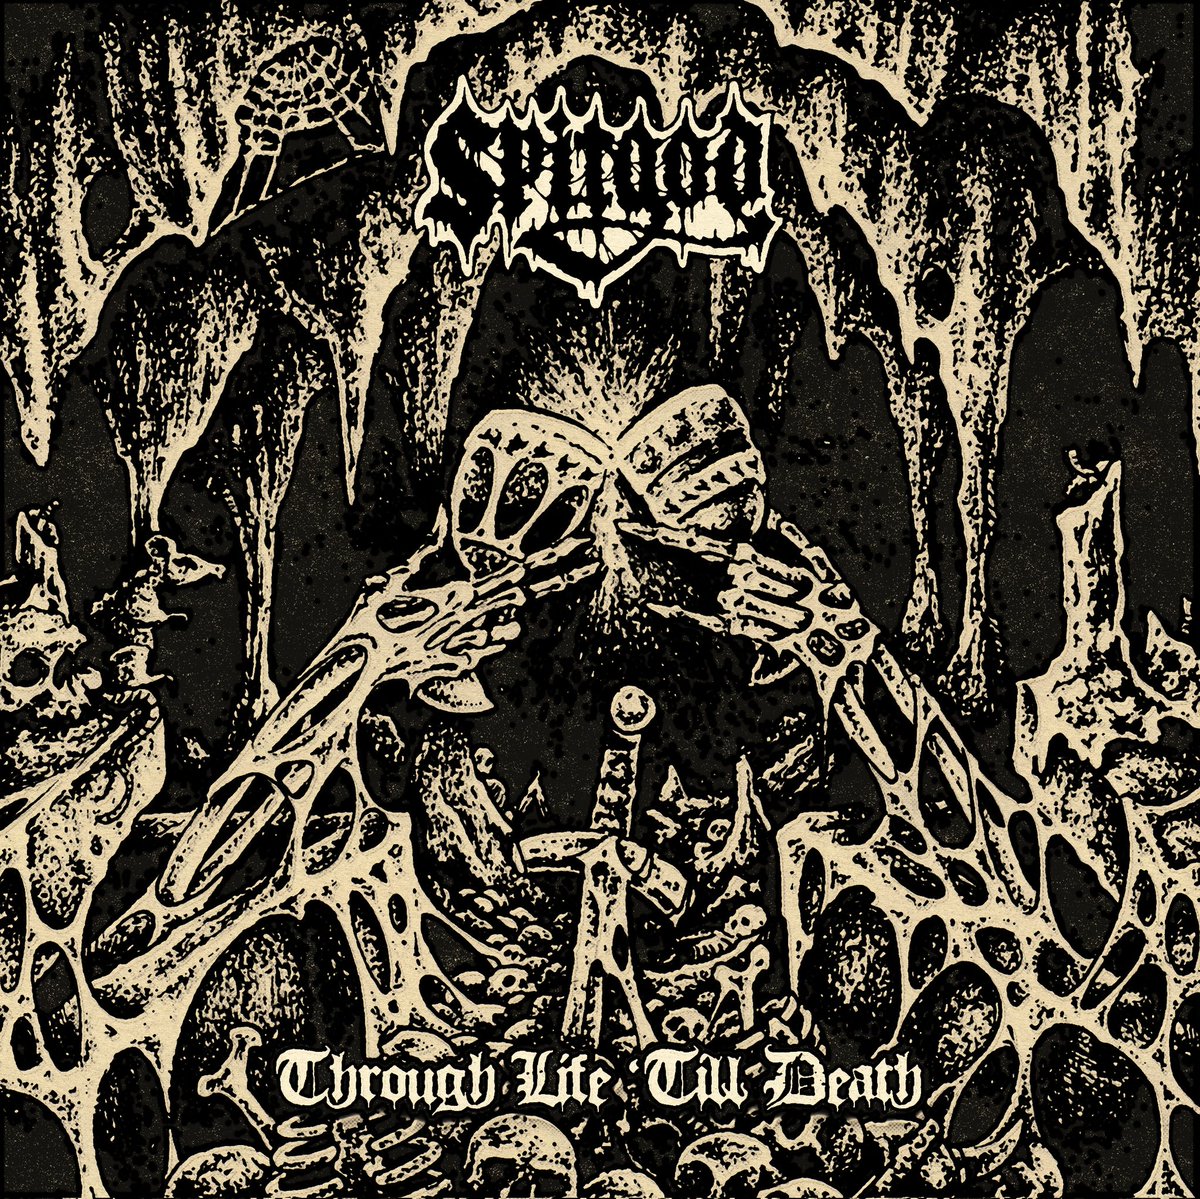 ⚡ Here it is, SPITGOD's cover art for the upcoming debut CD EP 'Through Life 'till Death' (by Miguel Serra). 6 tracks of straightforward Death/Punk and Blackened Thrash, set for release next May 24th, via #GruesomeRecords. #Spitgod #DeathMetal #Punk #ThrashMetal #Metal